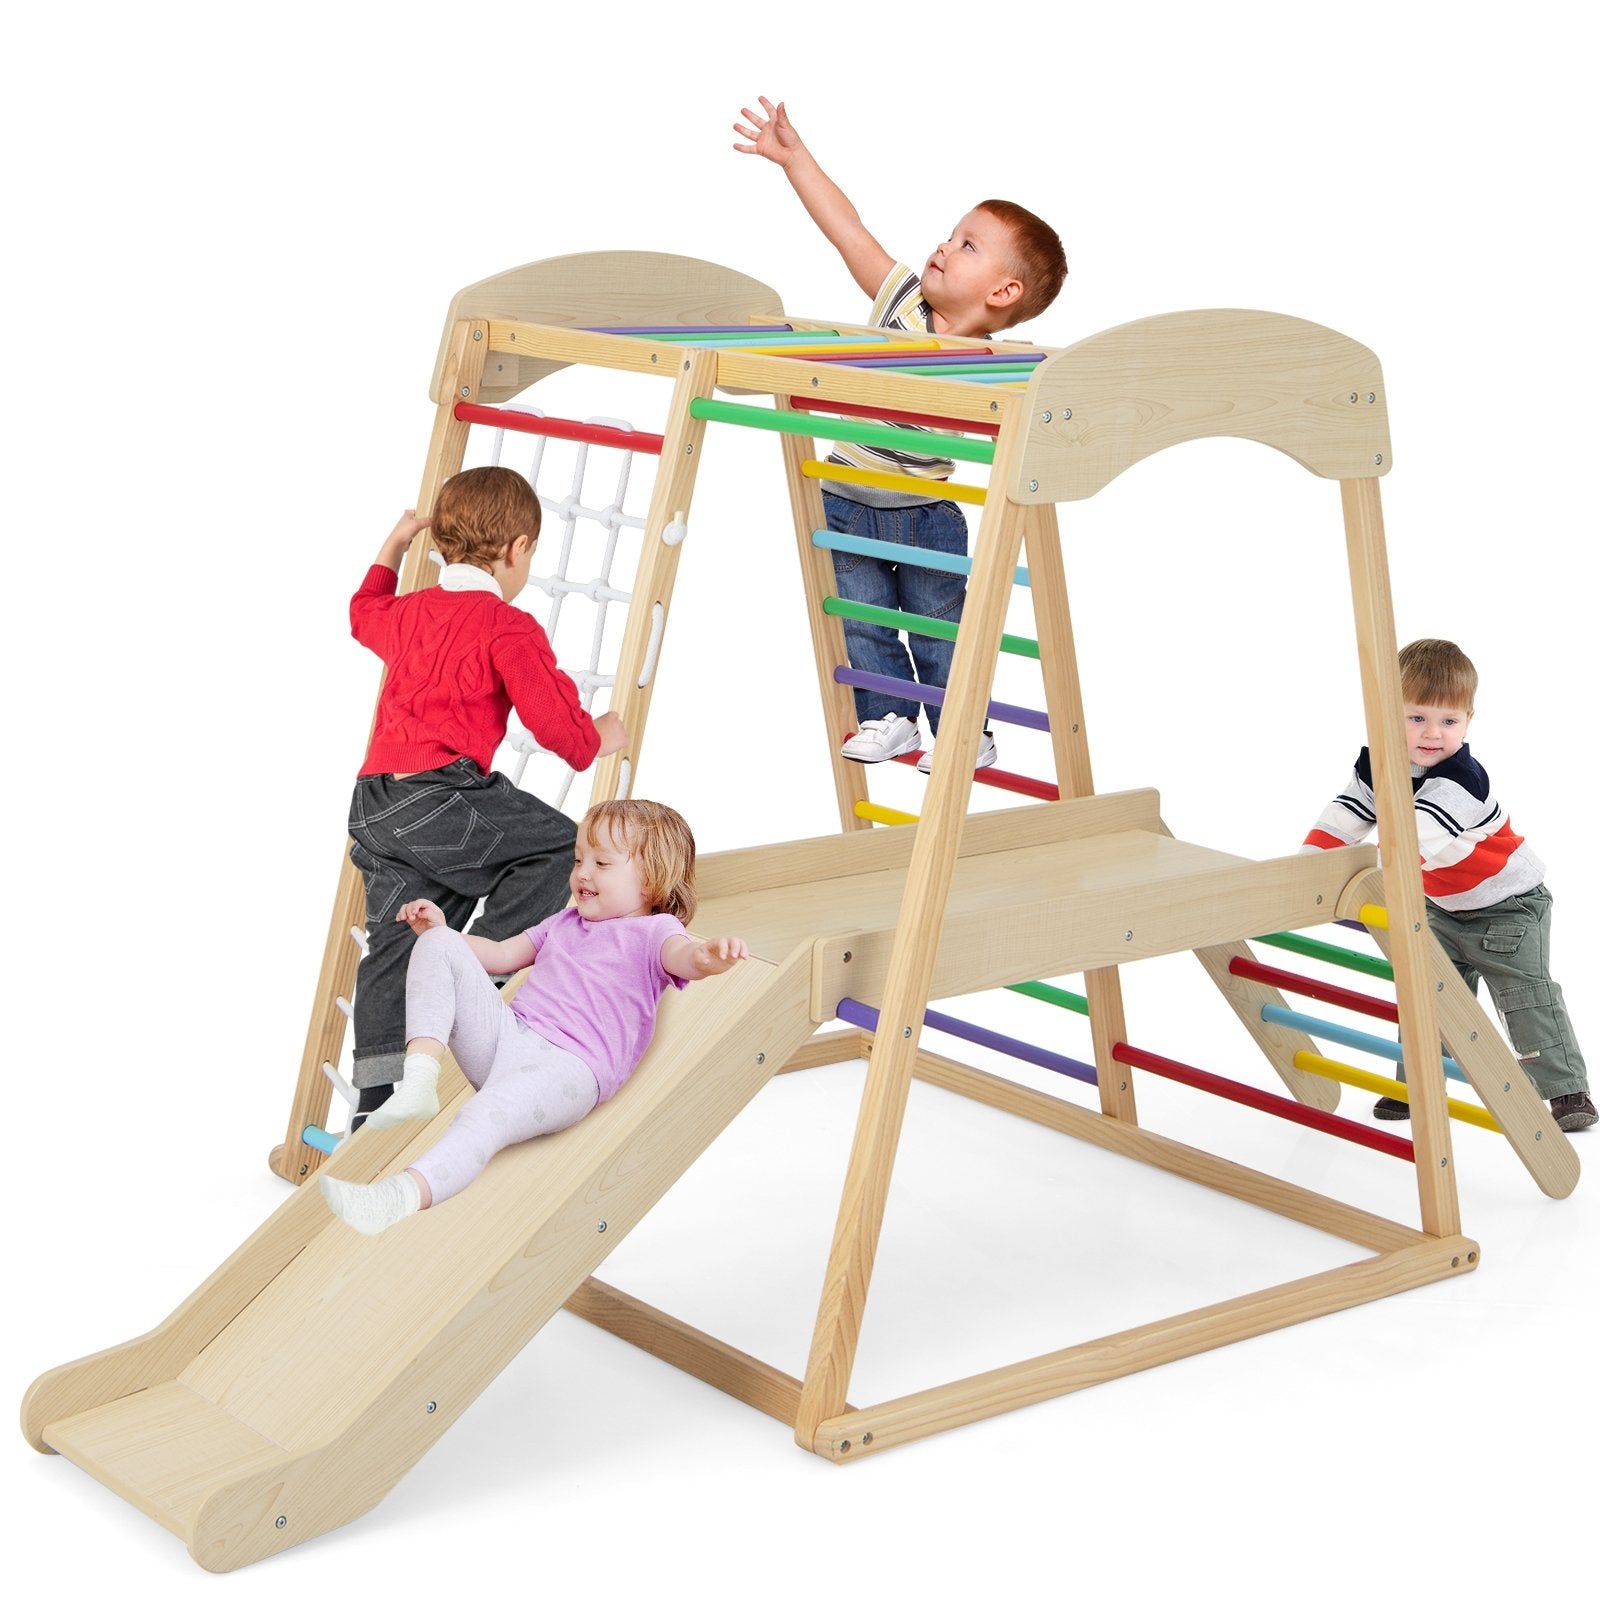 6-in-1 Indoor Jungle Gym Kids Wooden Playground with Monkey Bars, Multicolor - Gallery Canada